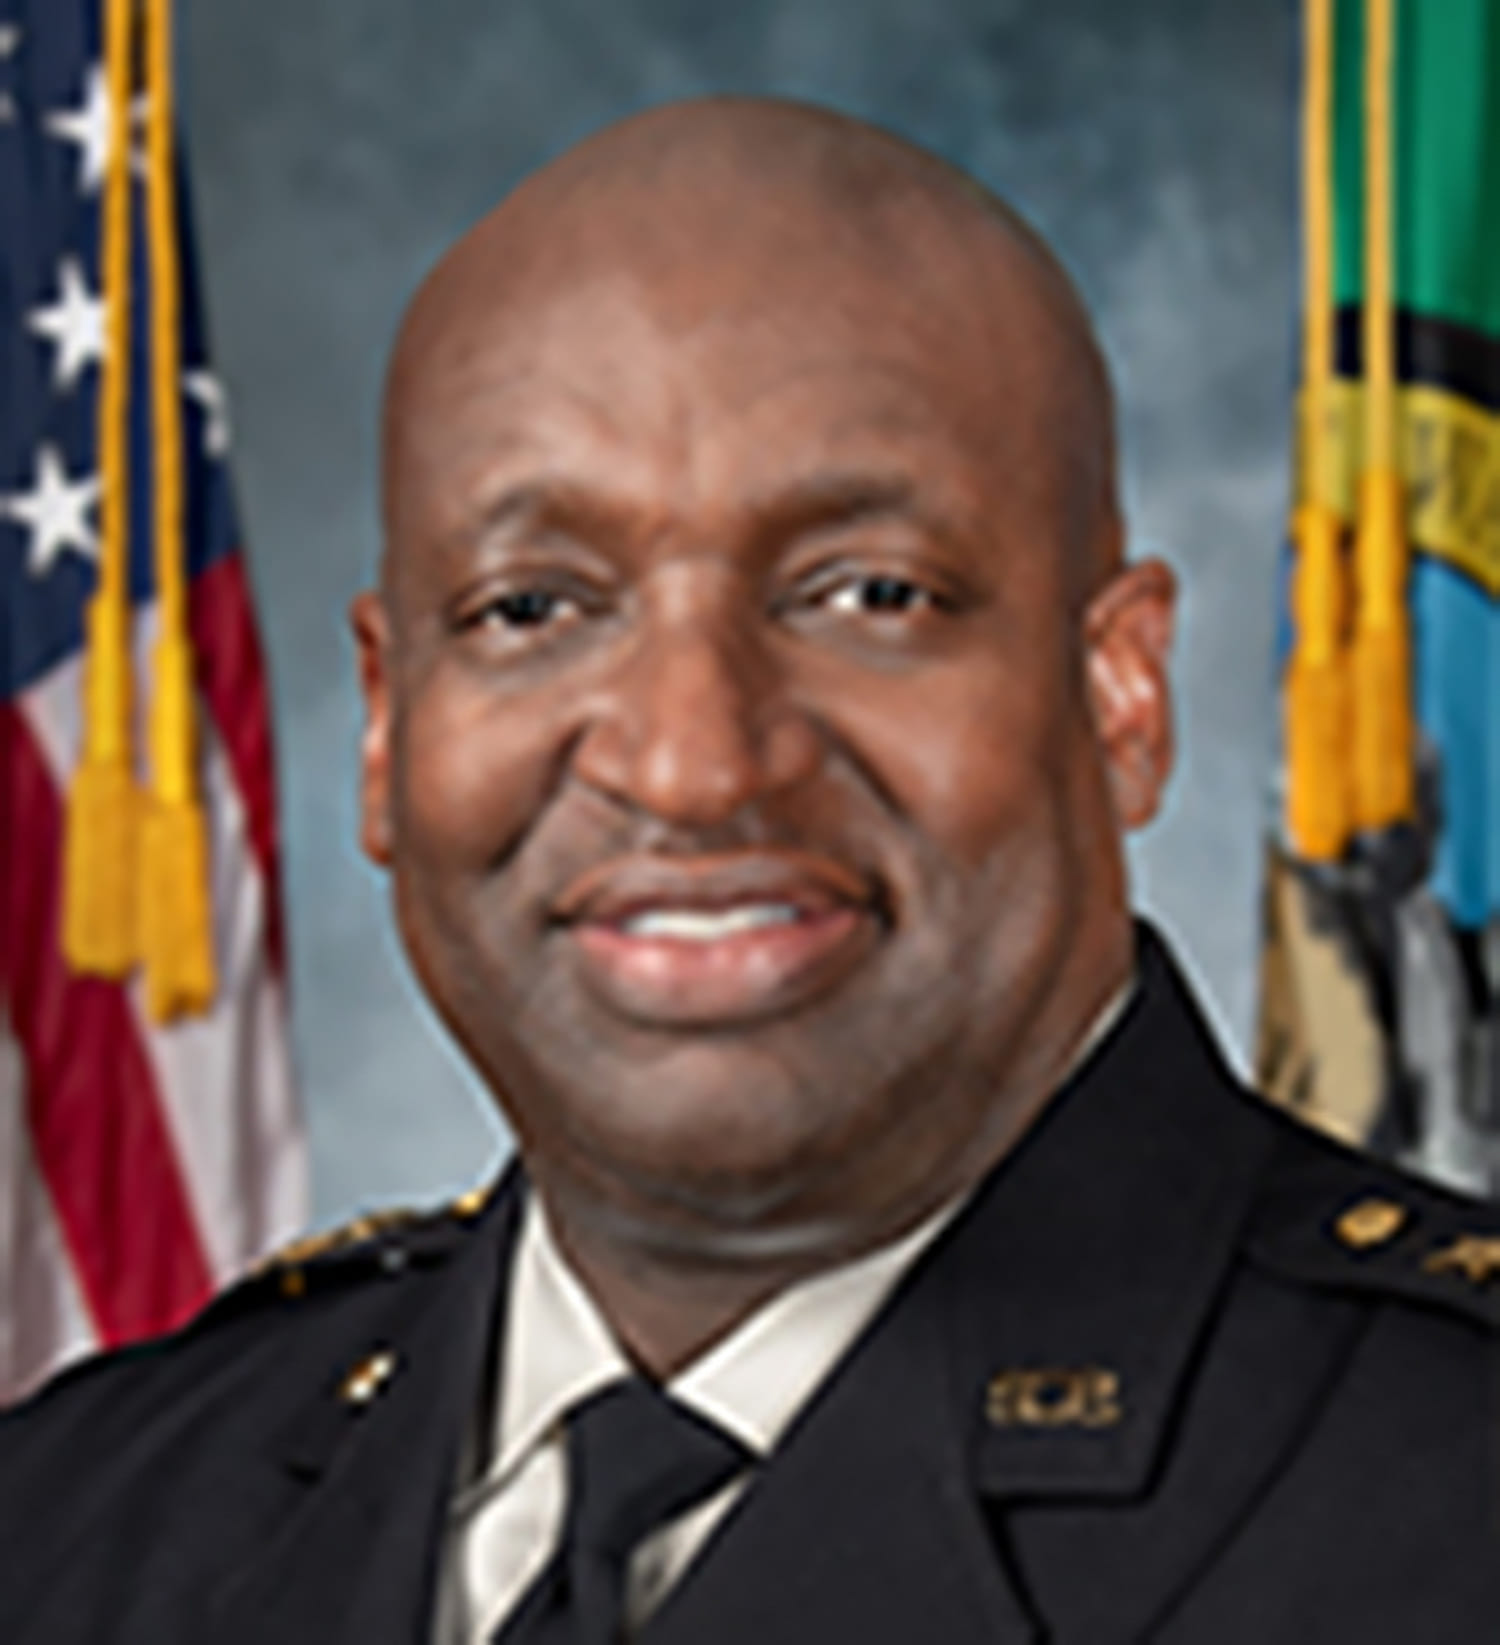 Seattle police chief removed amid discrimination, harassment lawsuits